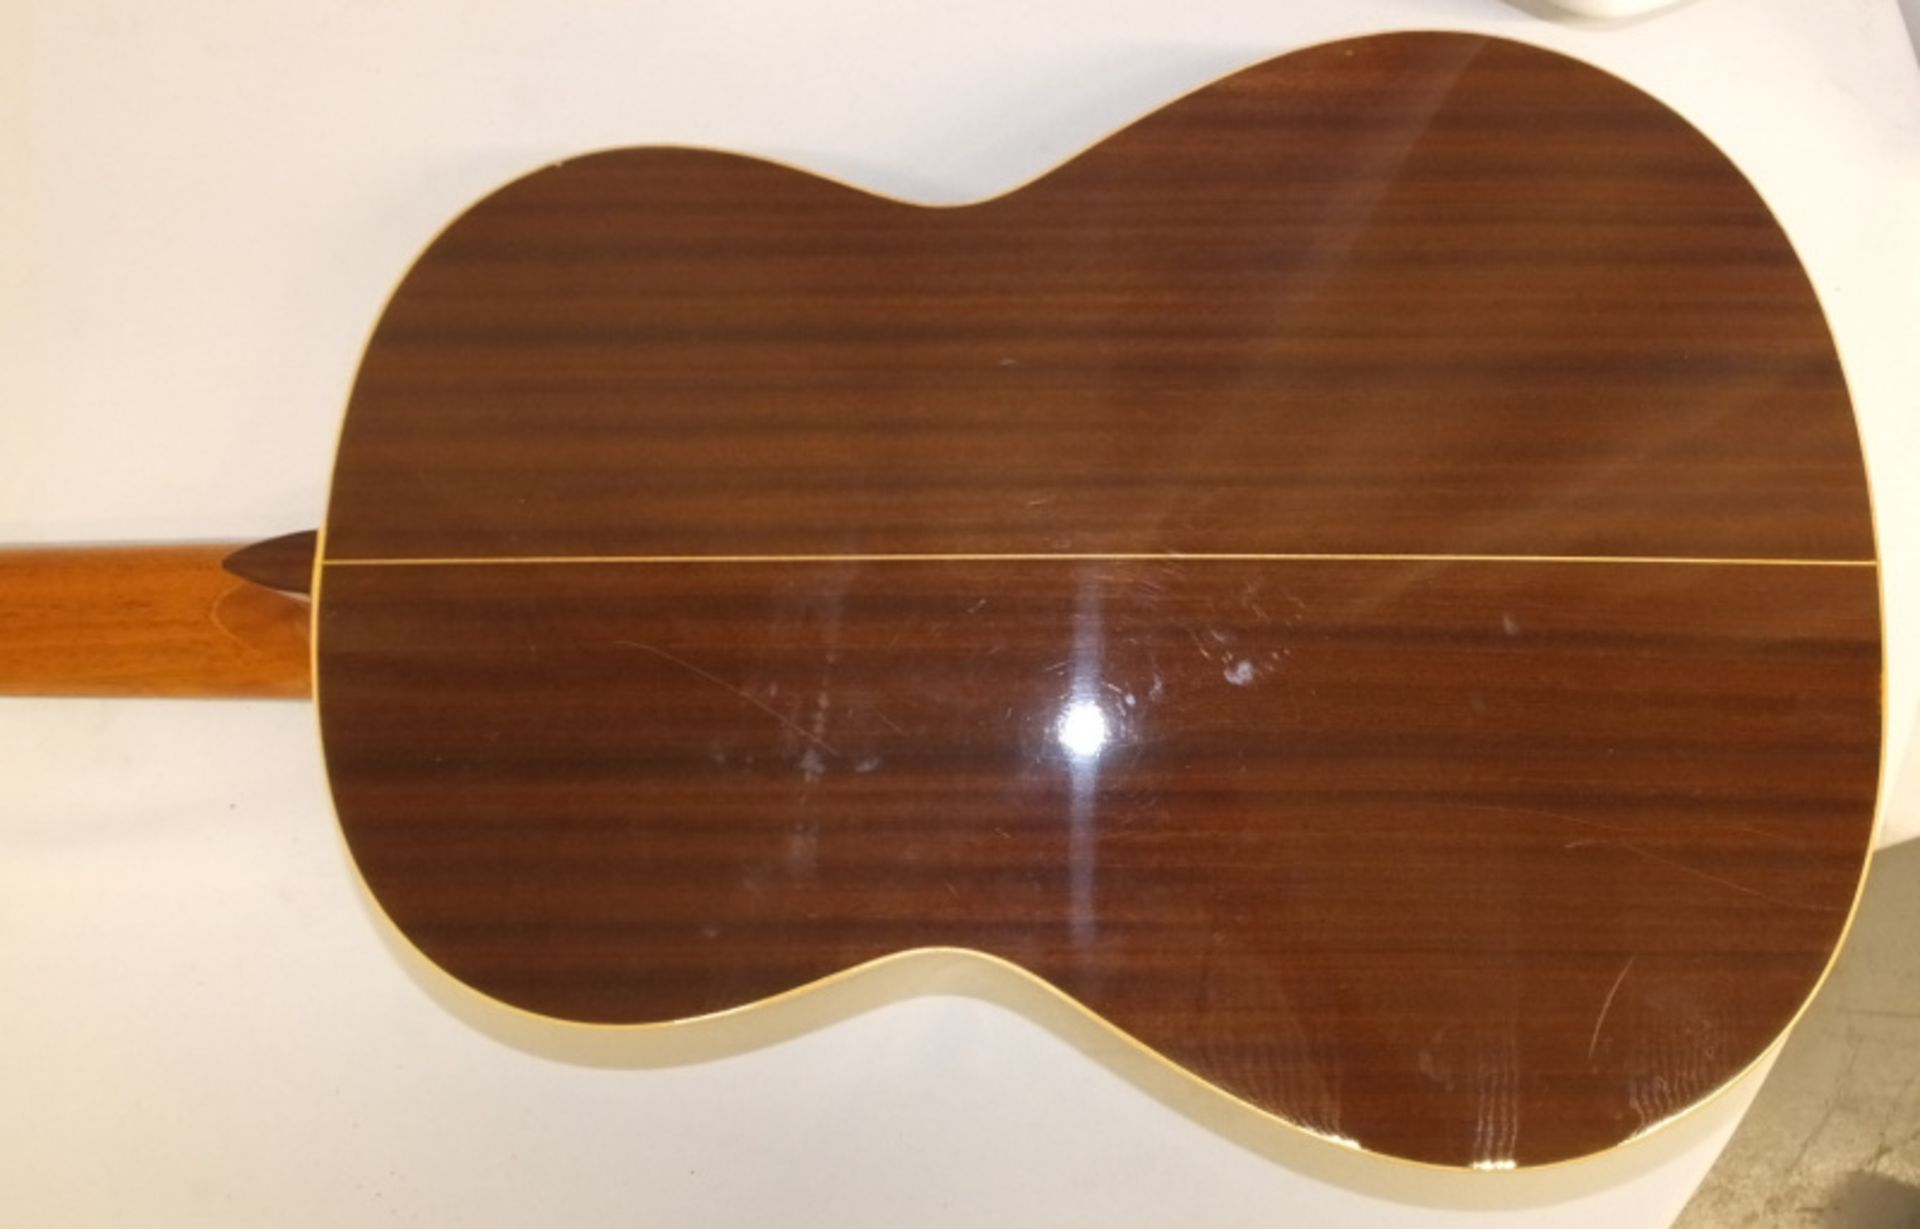 Vicente Sanchis Constructor 28s Acoustic Guitar in case (needs new strings) - Image 11 of 13